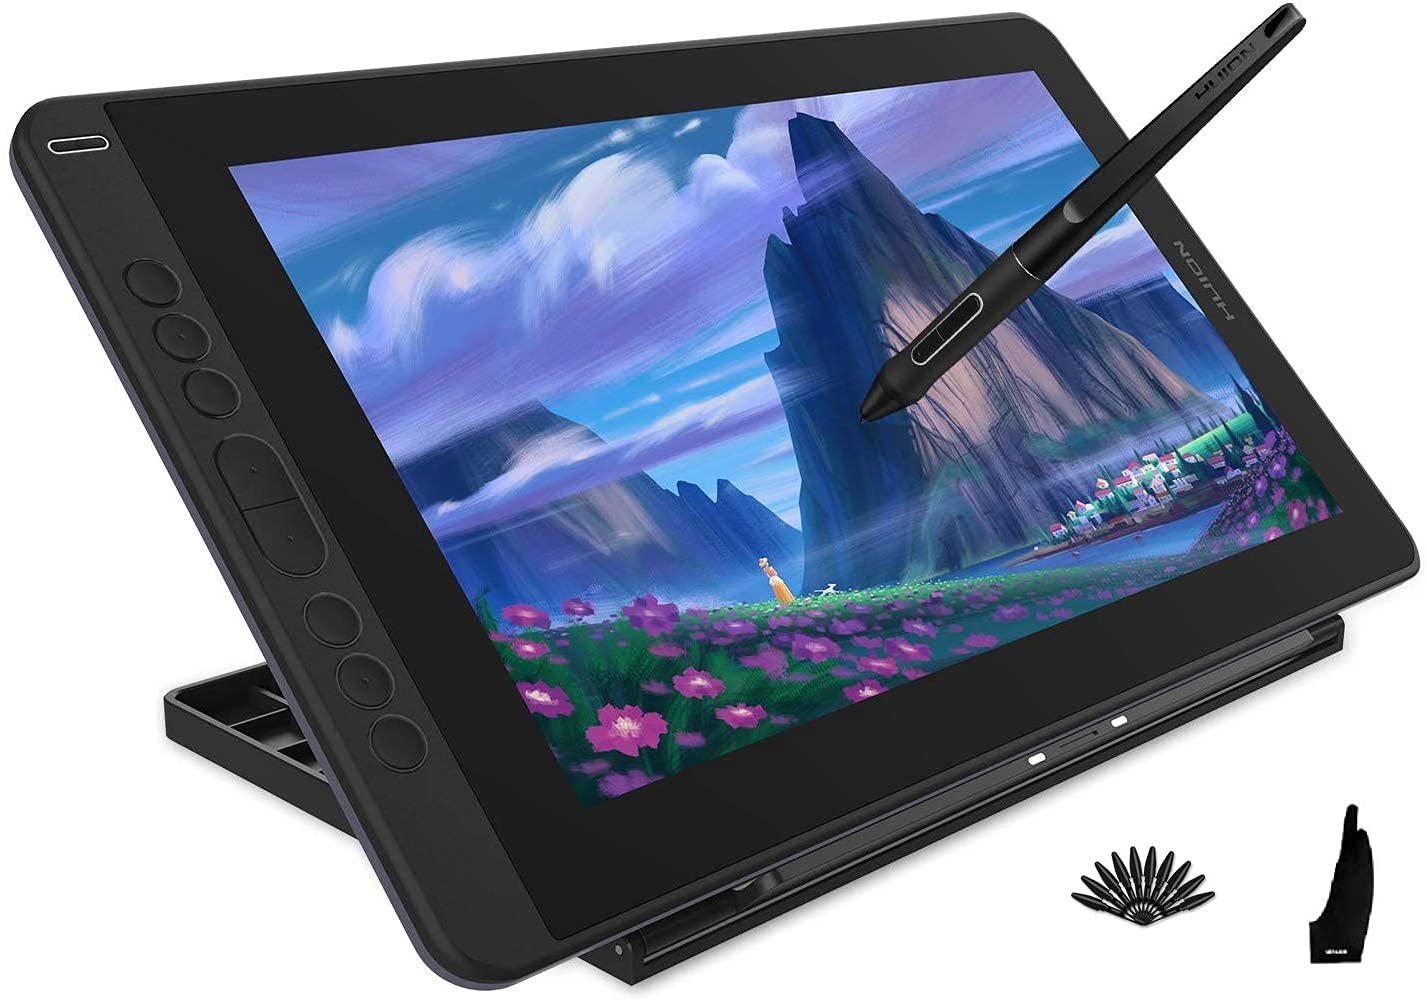 HUION 2020 Kamvas 13 Pen Display 2-in-1 Graphic Drawing Tablet with Screen Full-Laminated